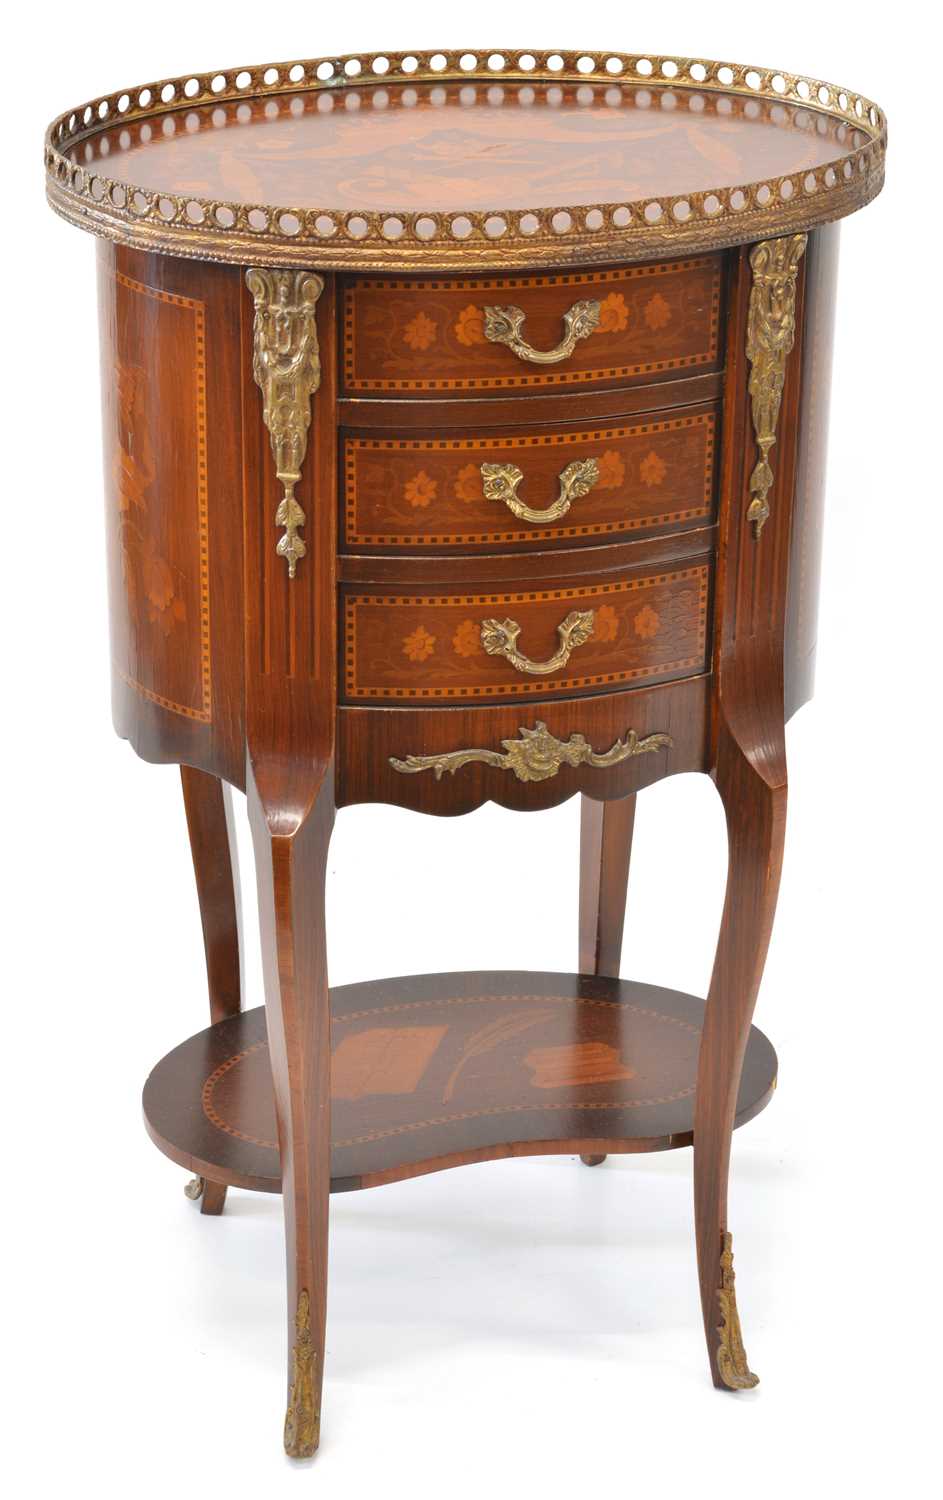 Late 19th Century Louis XV Style French Marquetry and Ormolu Mounted Side Table